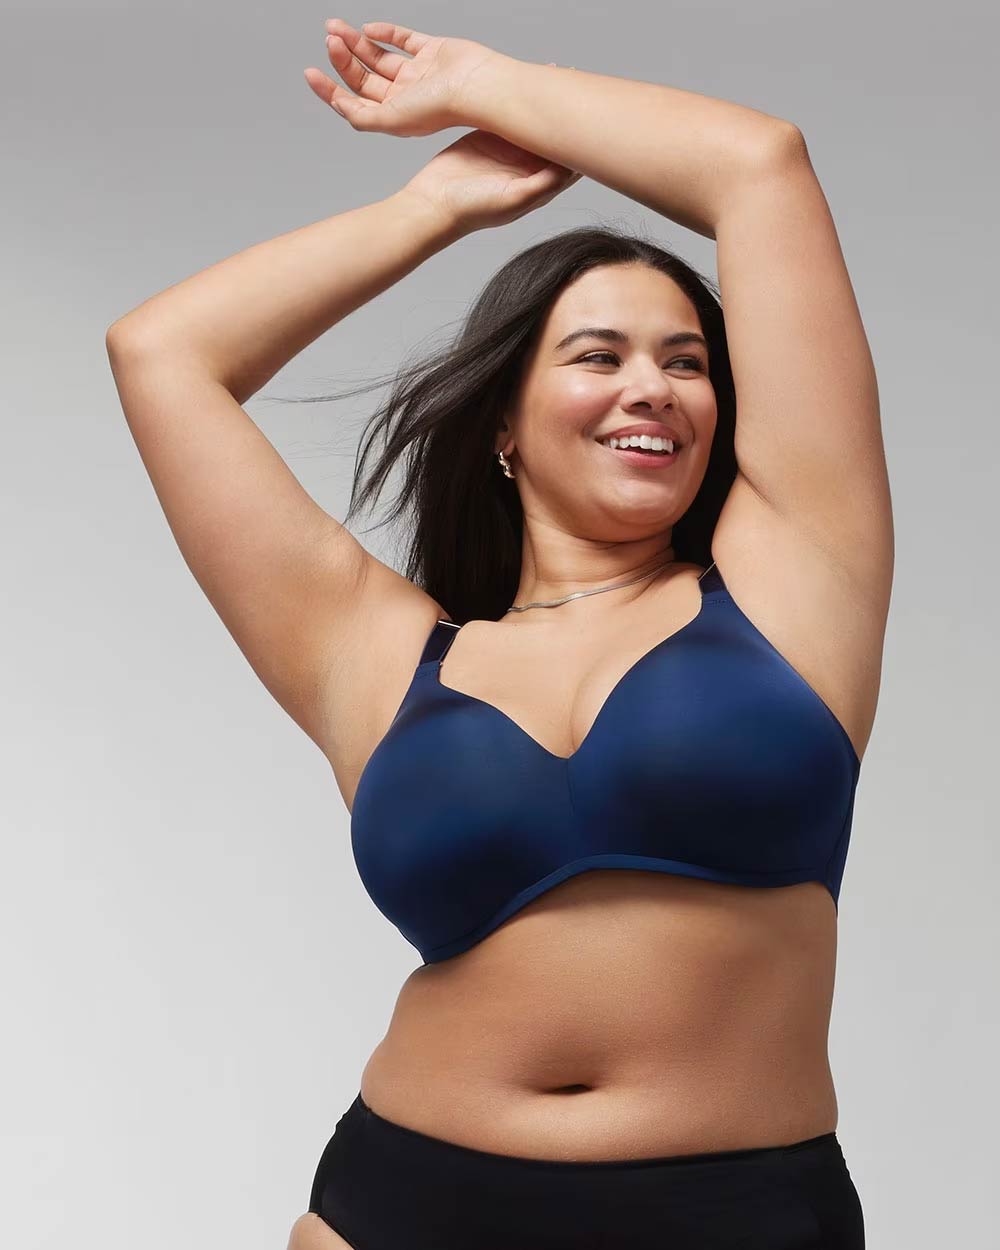 Soma<sup class=st-superscript>®</sup> women’s model wearing a navy blue bra and panties, and a silver chain necklace.